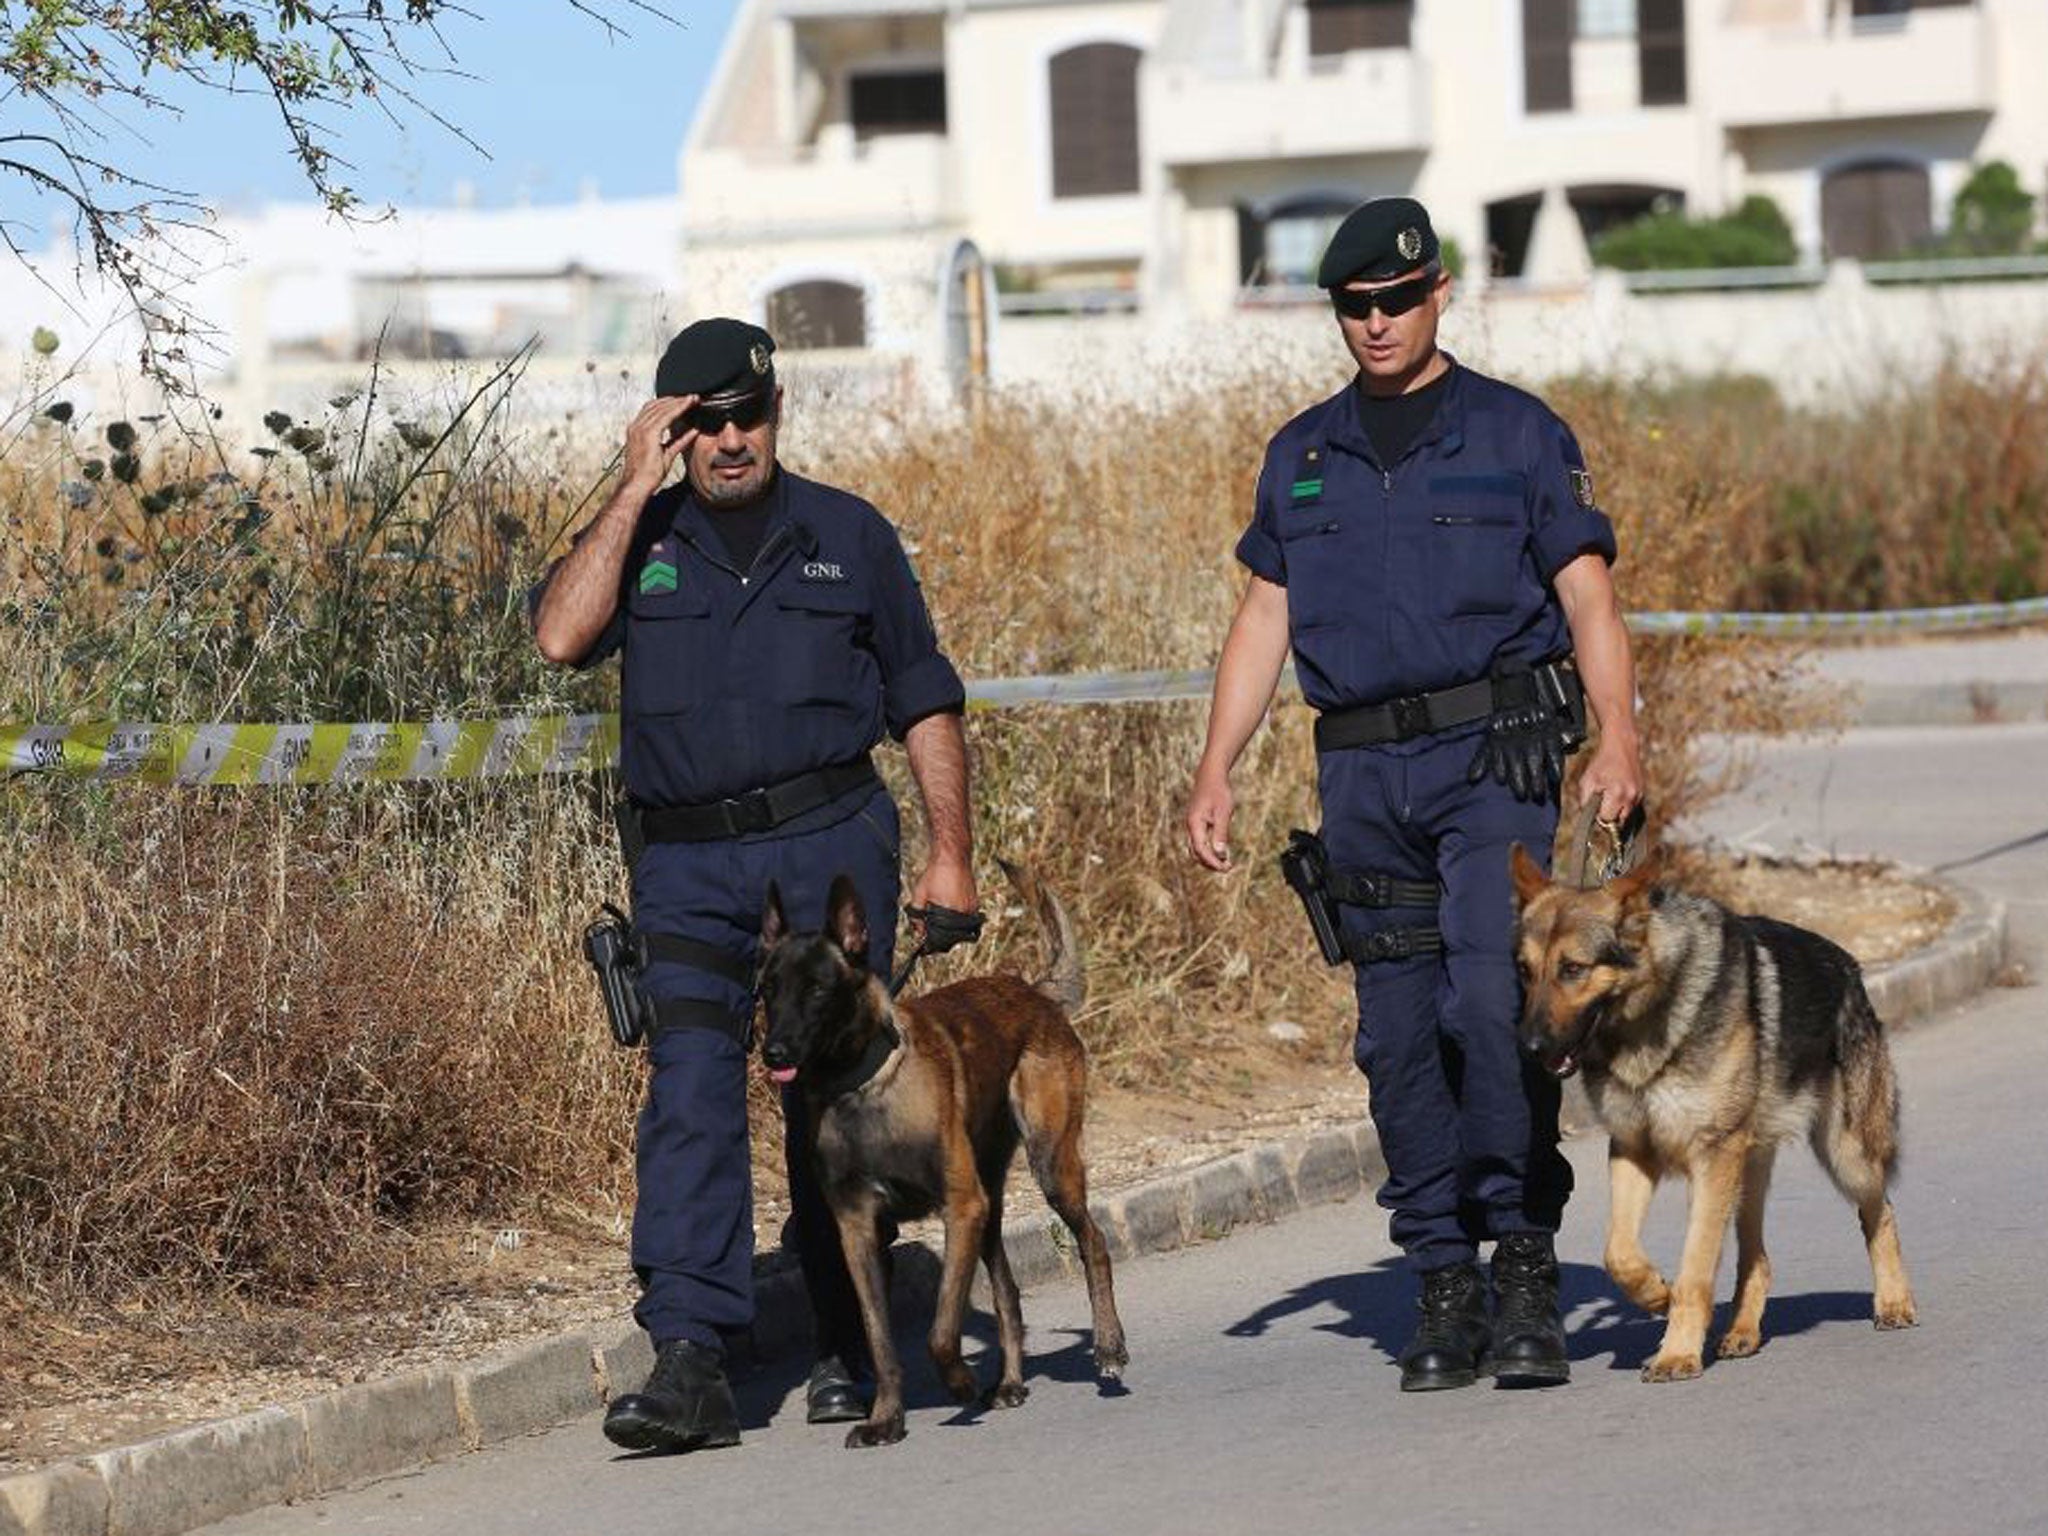 Portuguese police officers walk with dogs near a cordoned off area of scrubland close to where Madeleine McCann went missing seven years ago in the resort of Praia da Luz, Portugal, where where British police are currently searching